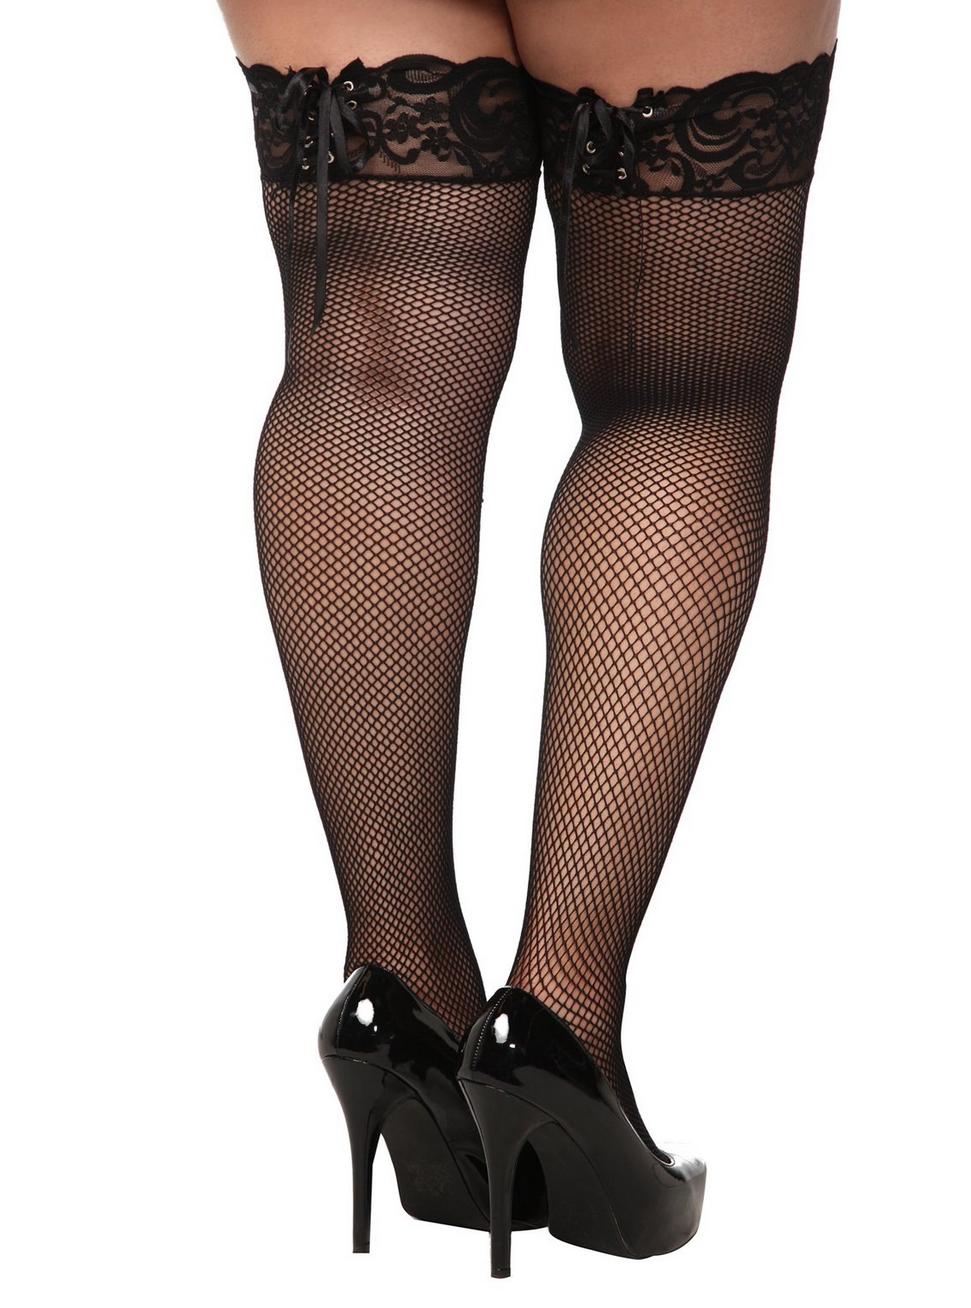 bruce litaker recommends plus size fishnet thigh high stockings pic